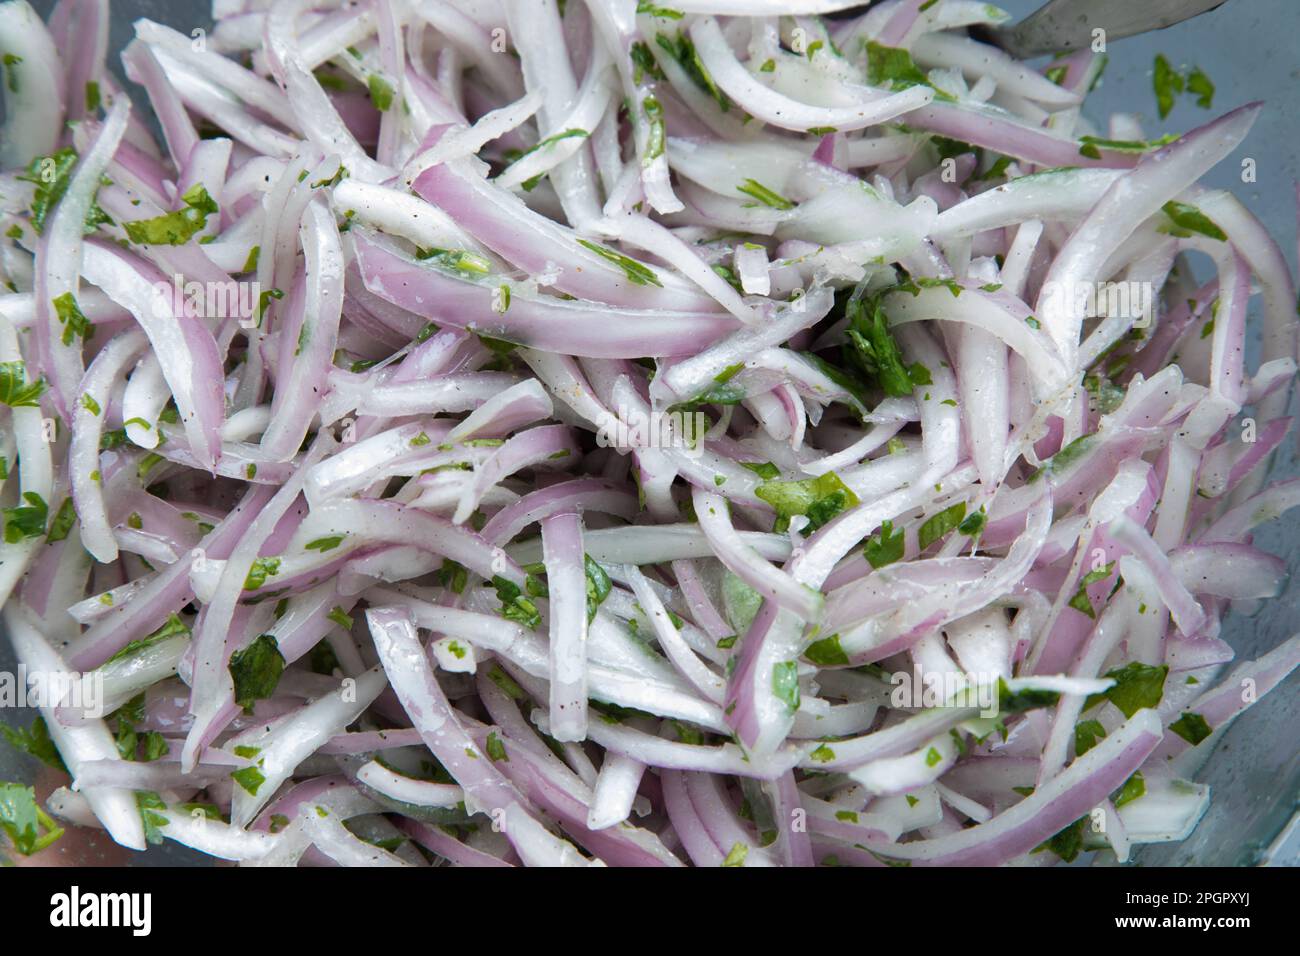 Raw red onion sliced with parsley salad Stock Photo